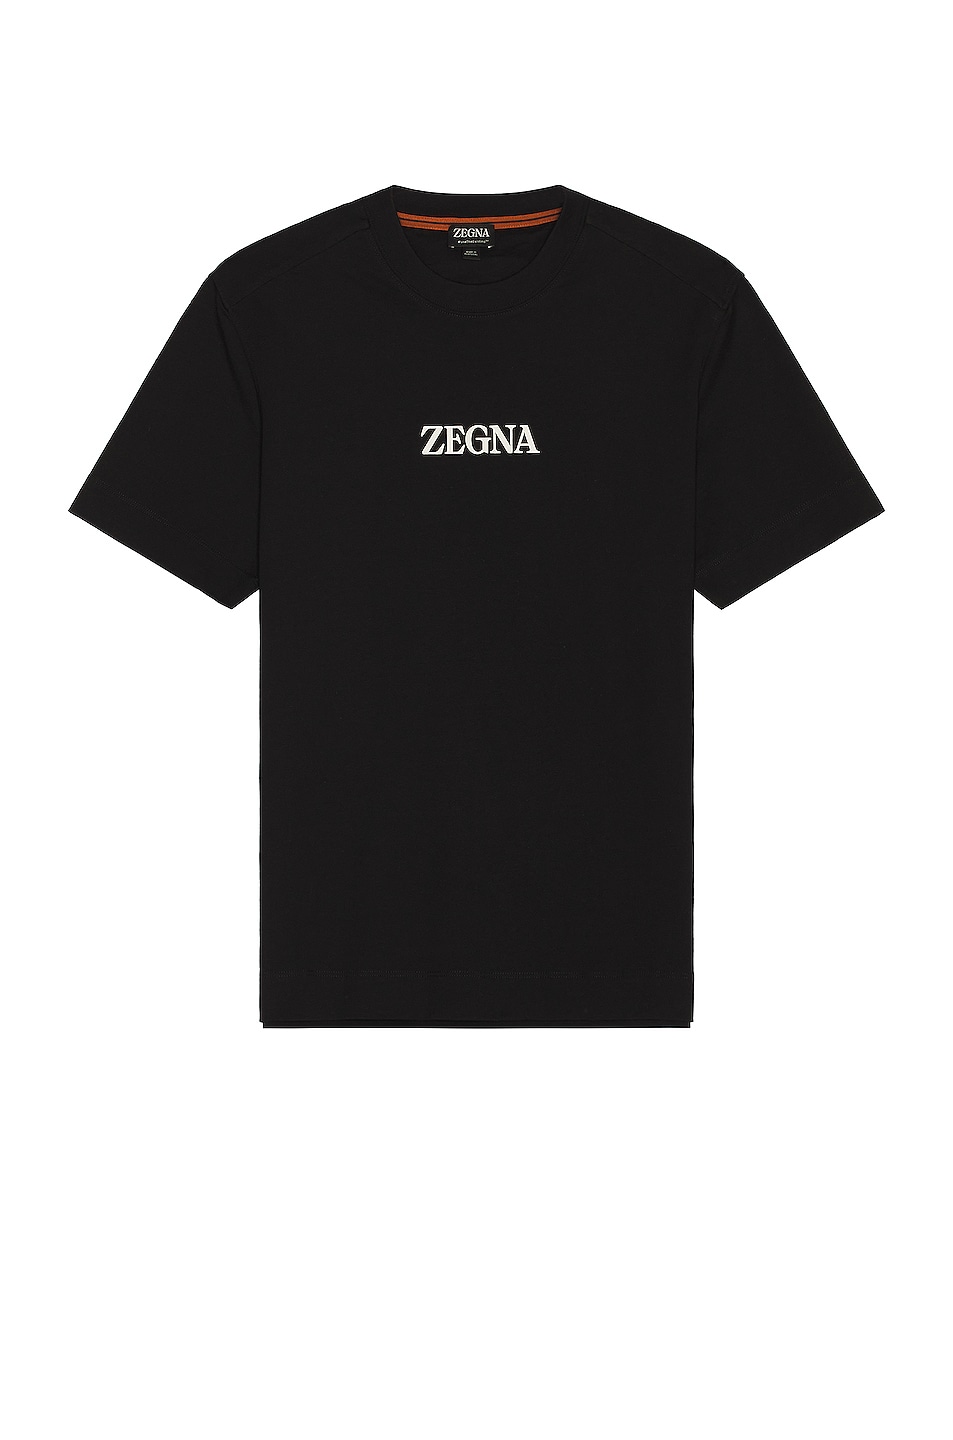 Image 1 of Zegna #usetheexisting T-shirt in Black